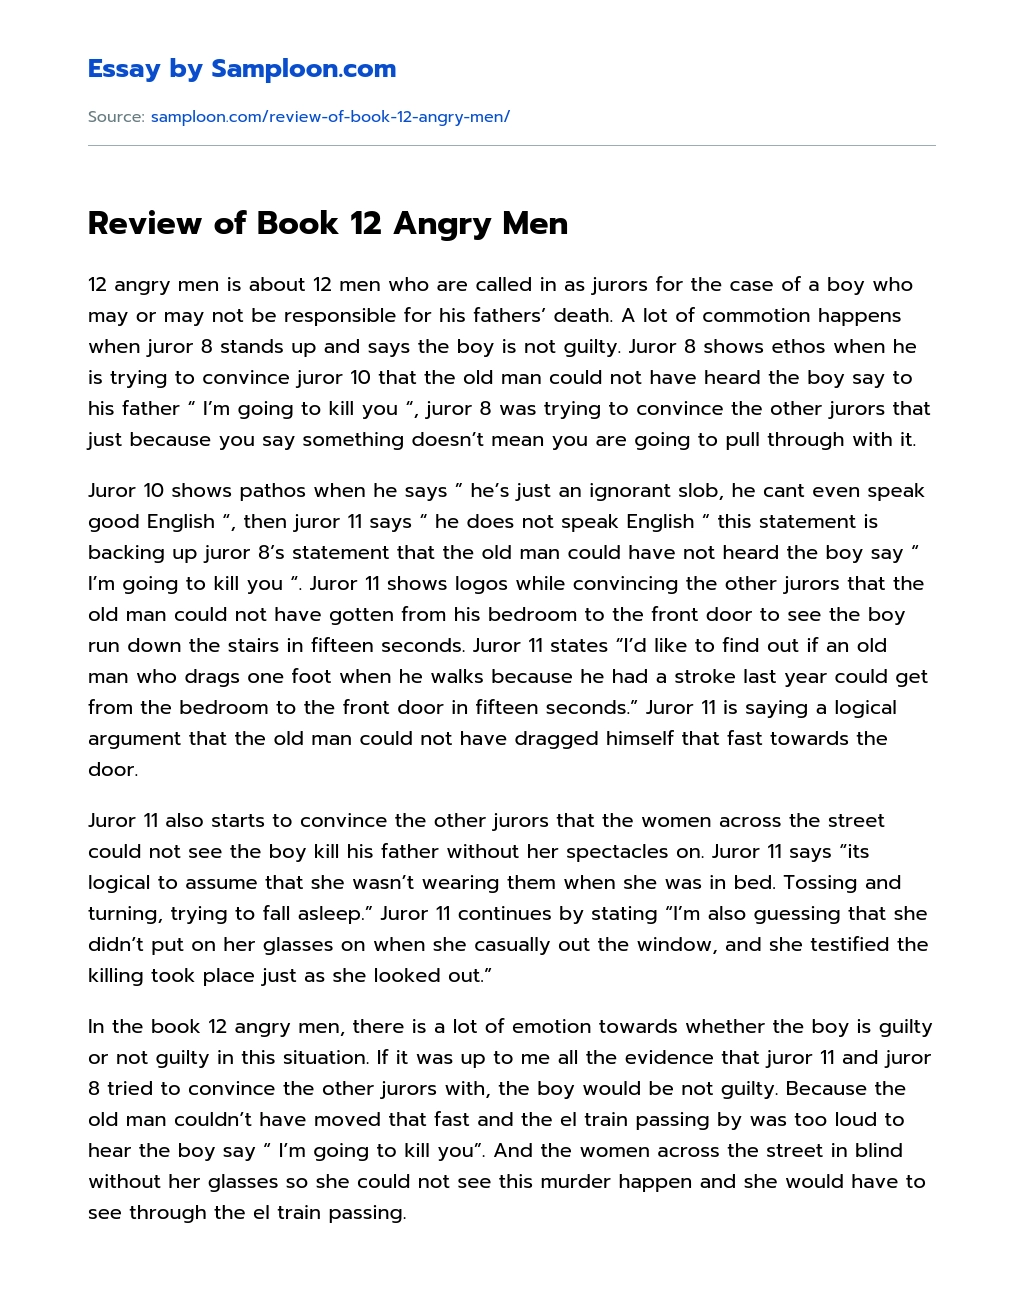 12 angry men essay